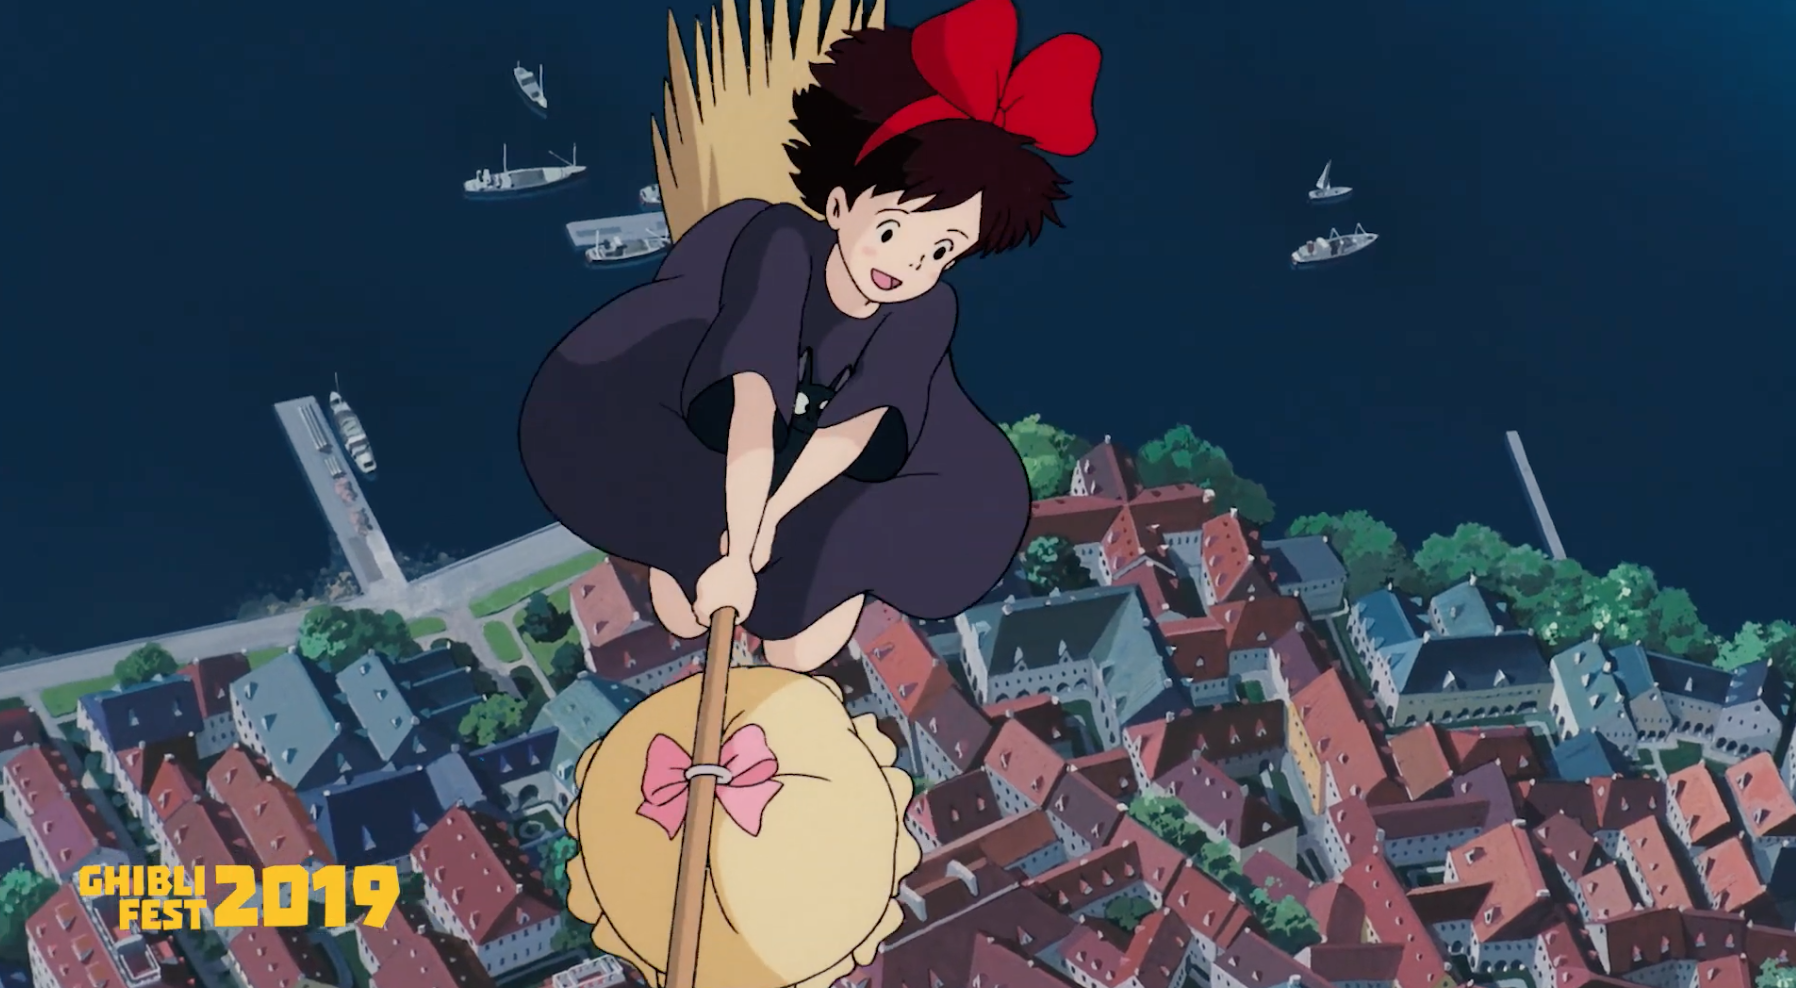 Kiki's Delivery Service holds surprises in unexpected places.